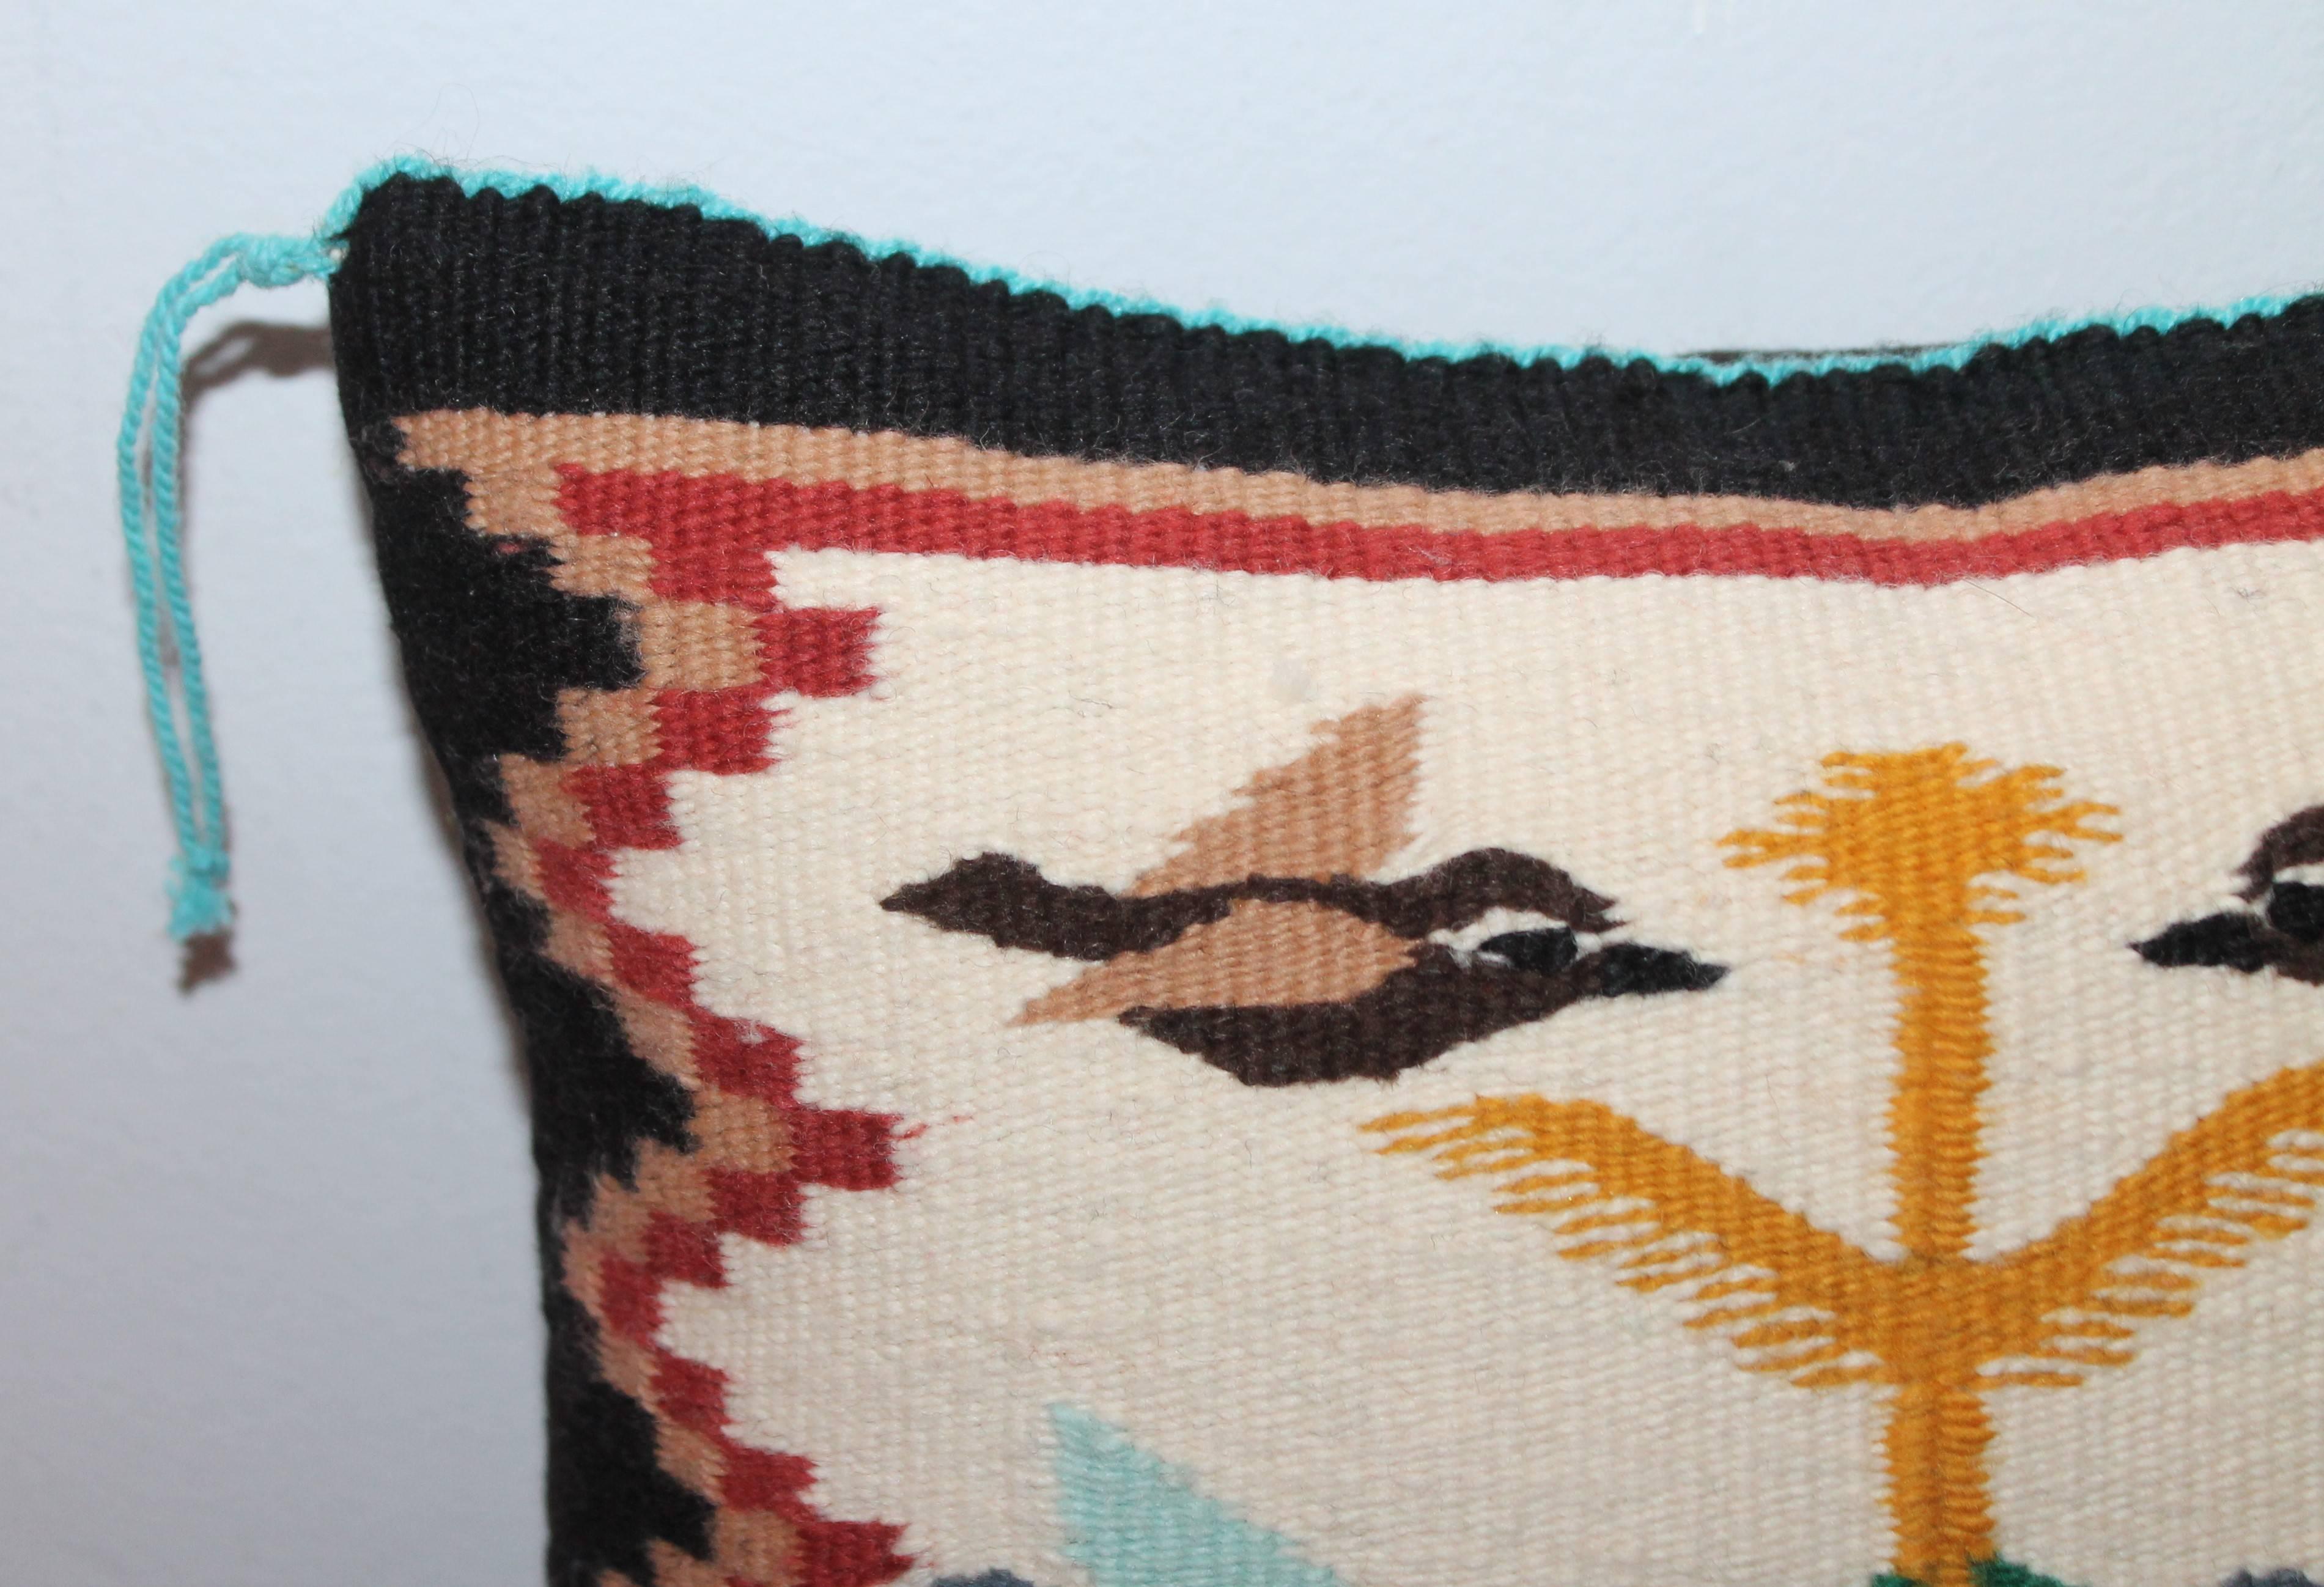 This fun pillow has different color birds and has a black cotton linen backing.